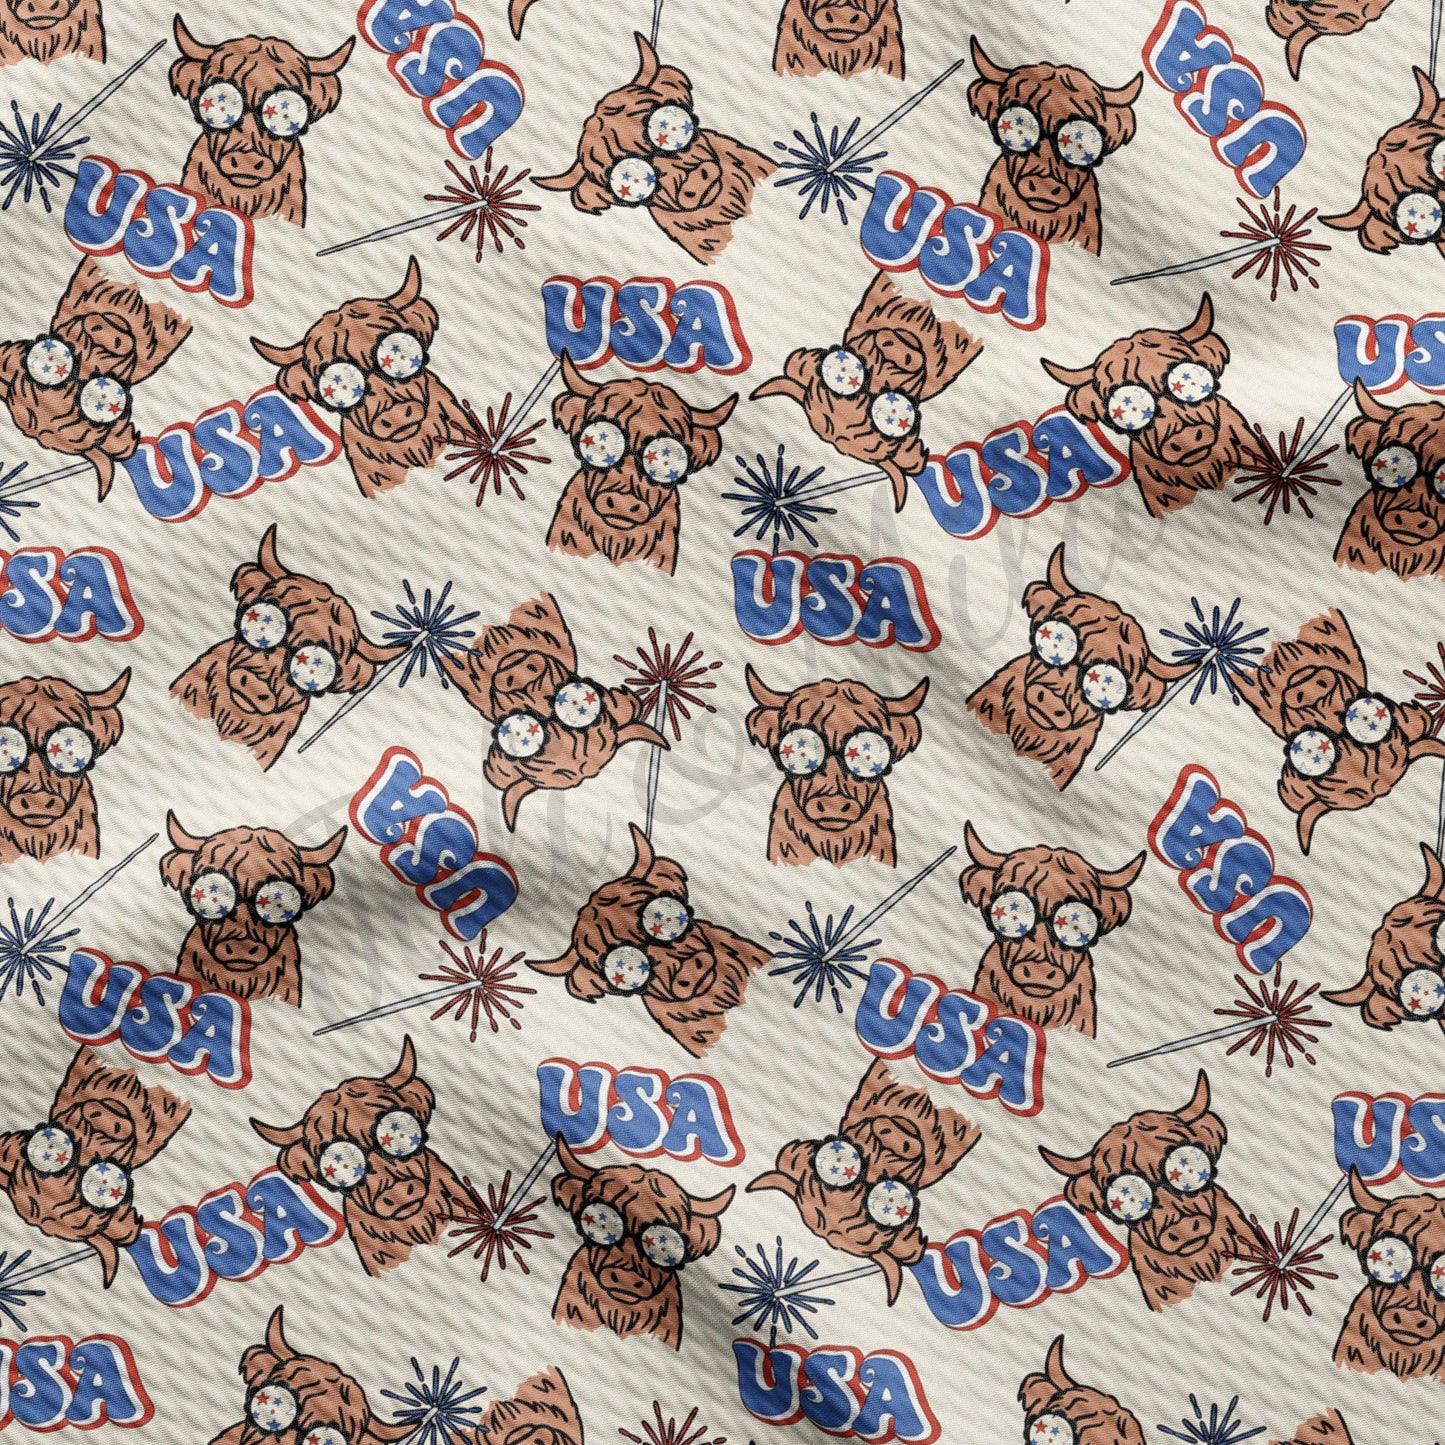 Patriotic 4th of July Bullet Fabric AA353